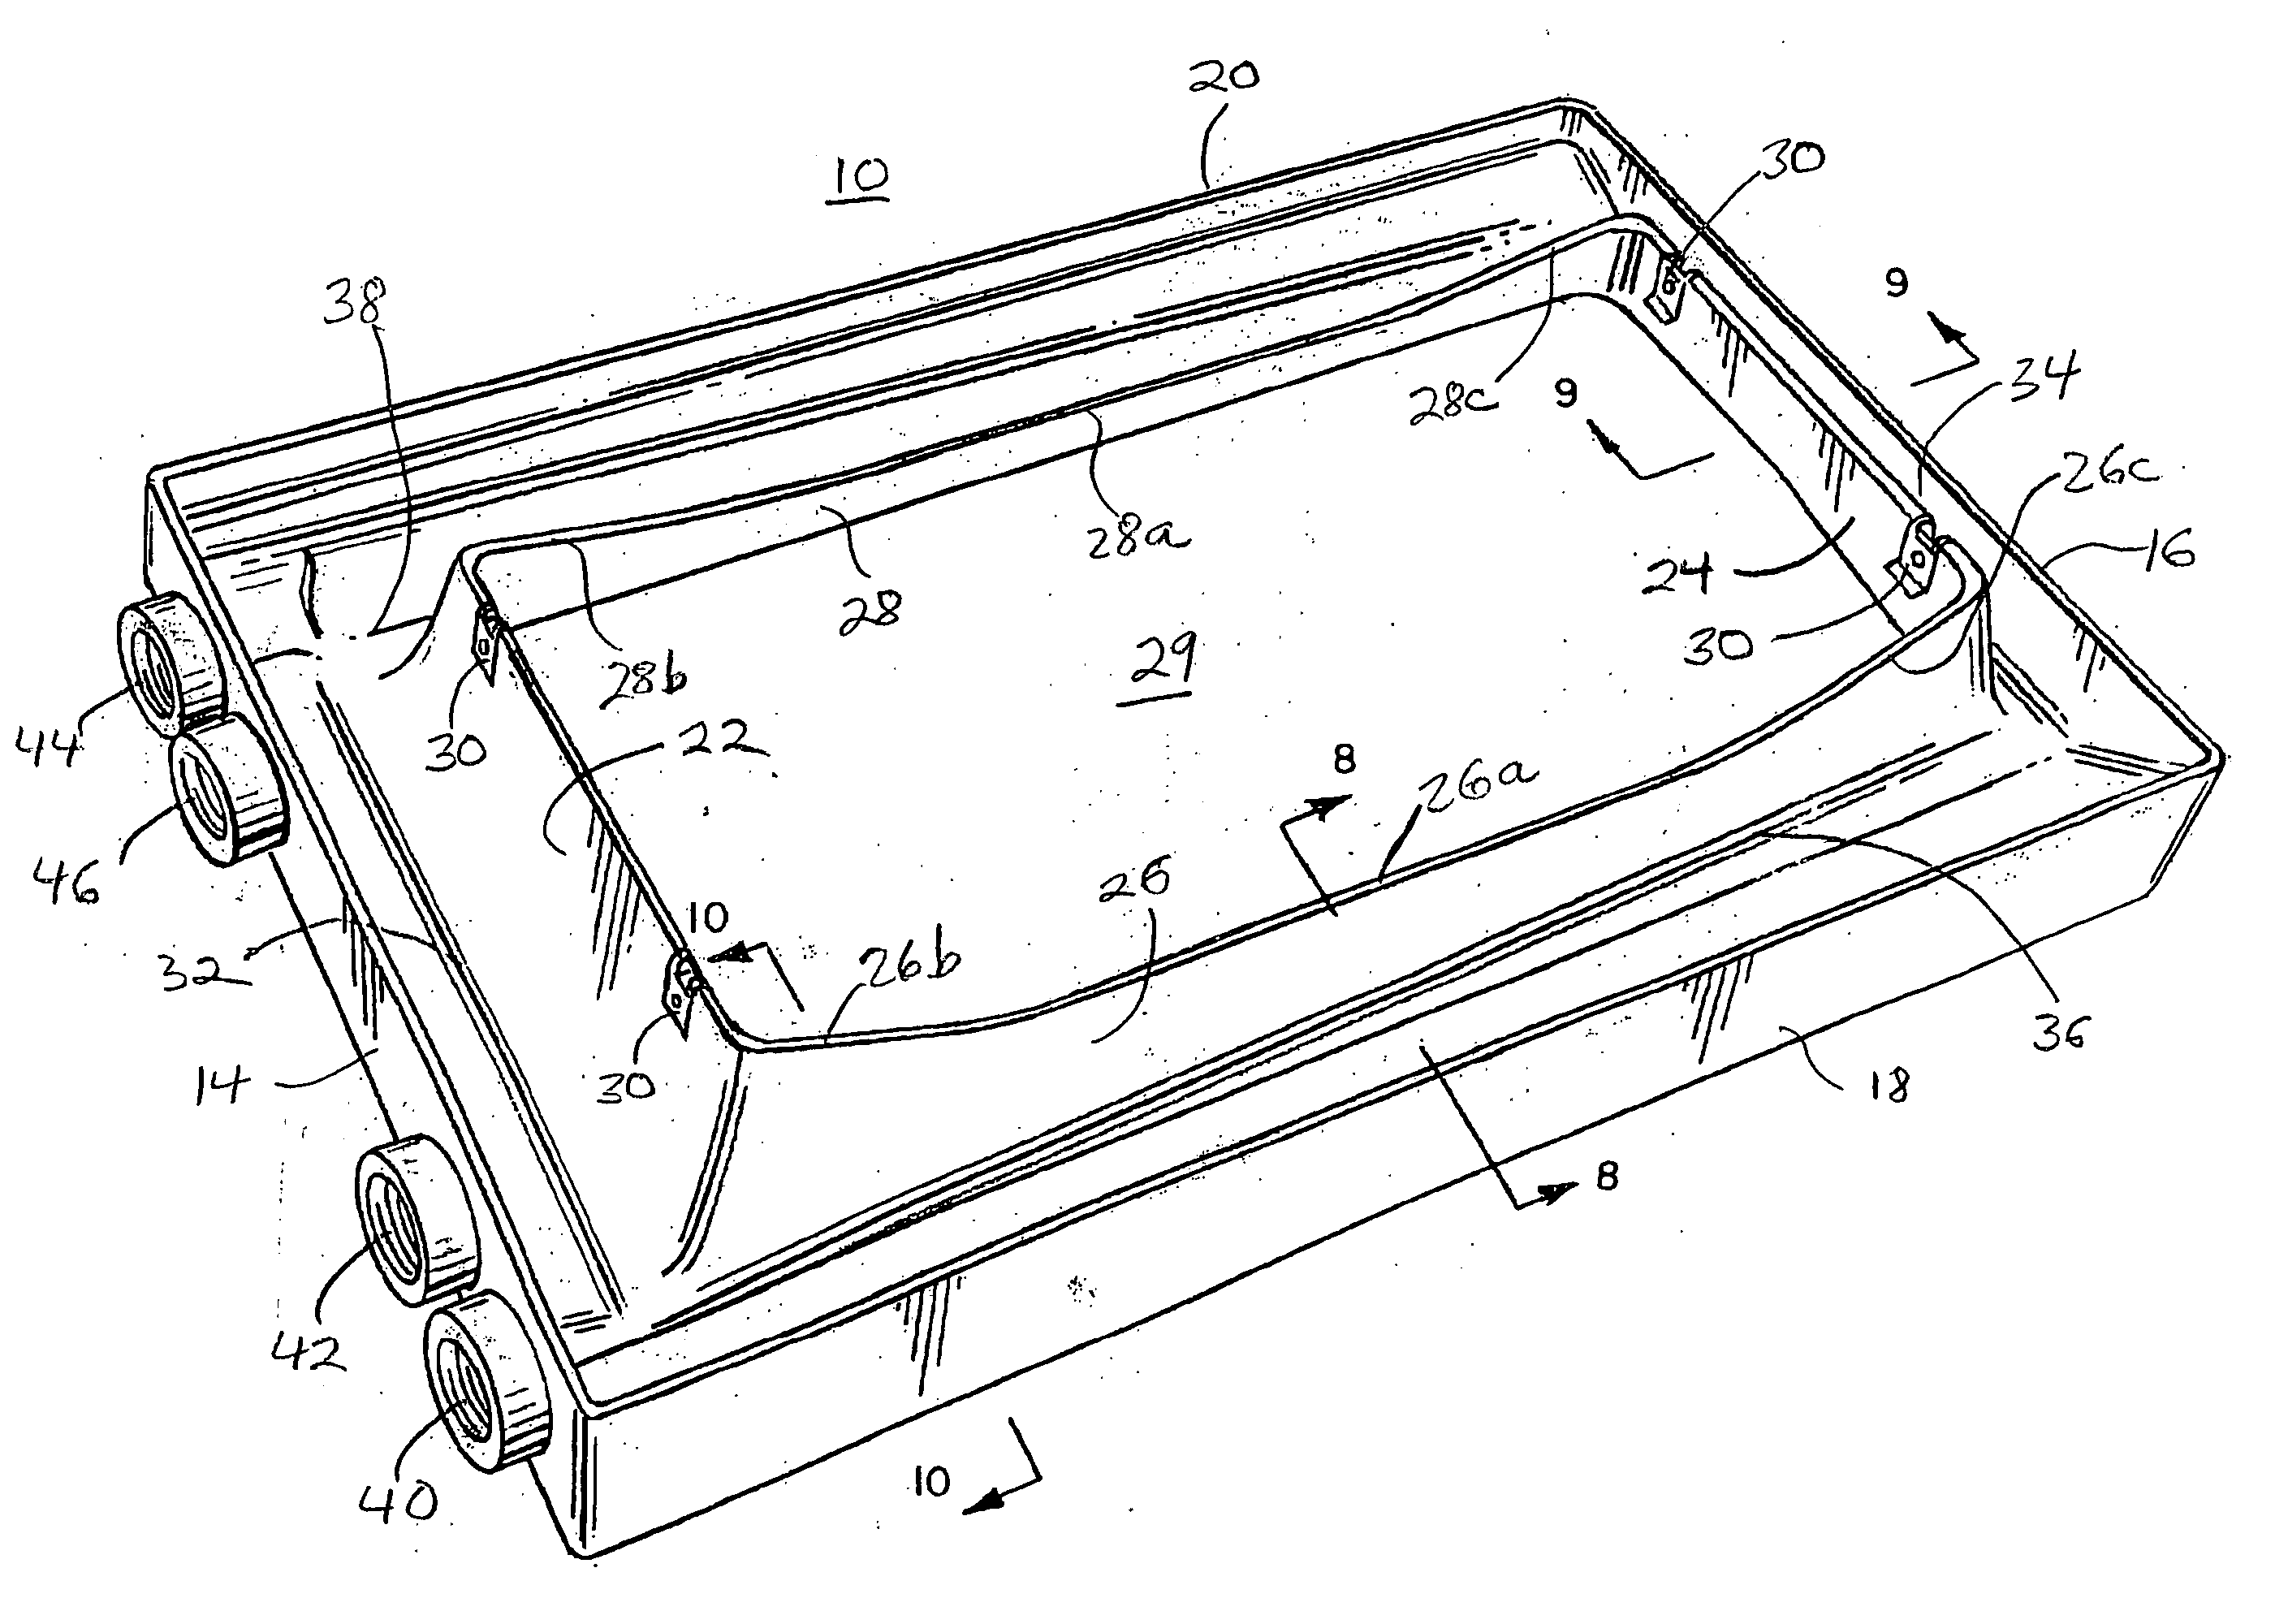 Condensate drain pan for air conditioning system